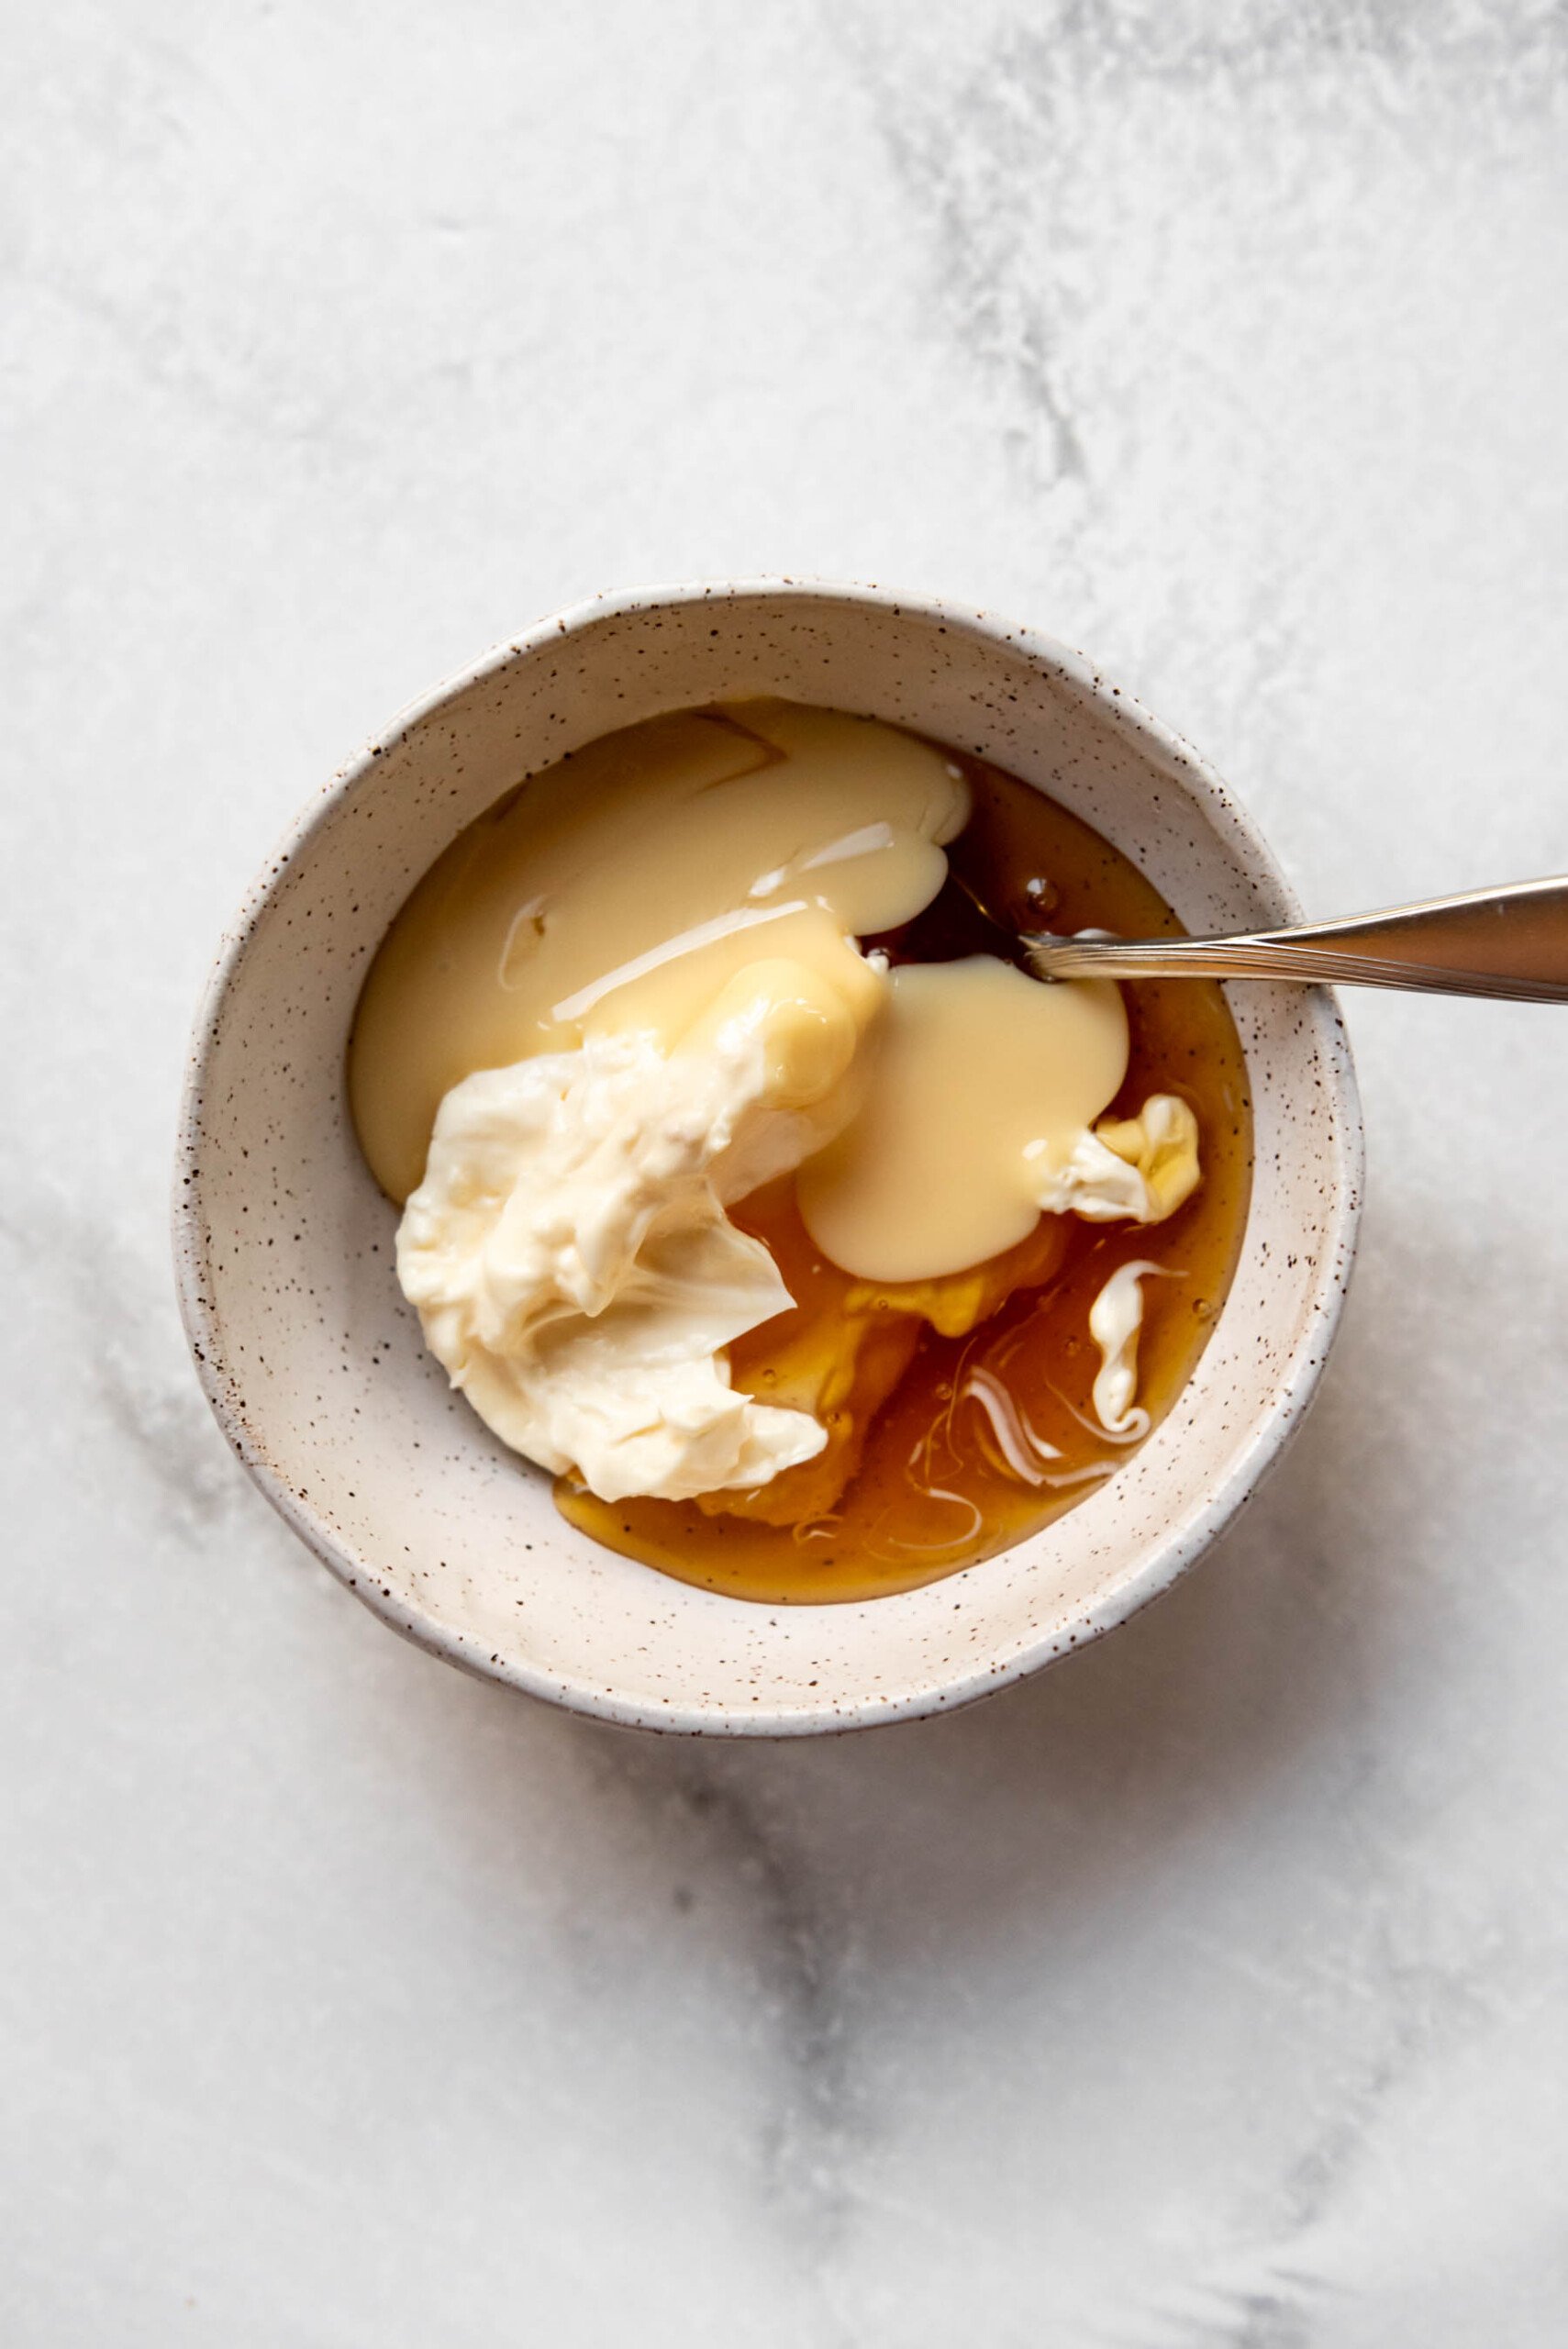 Combining mayo, honey, and sweetened condensed milk in a bowl.